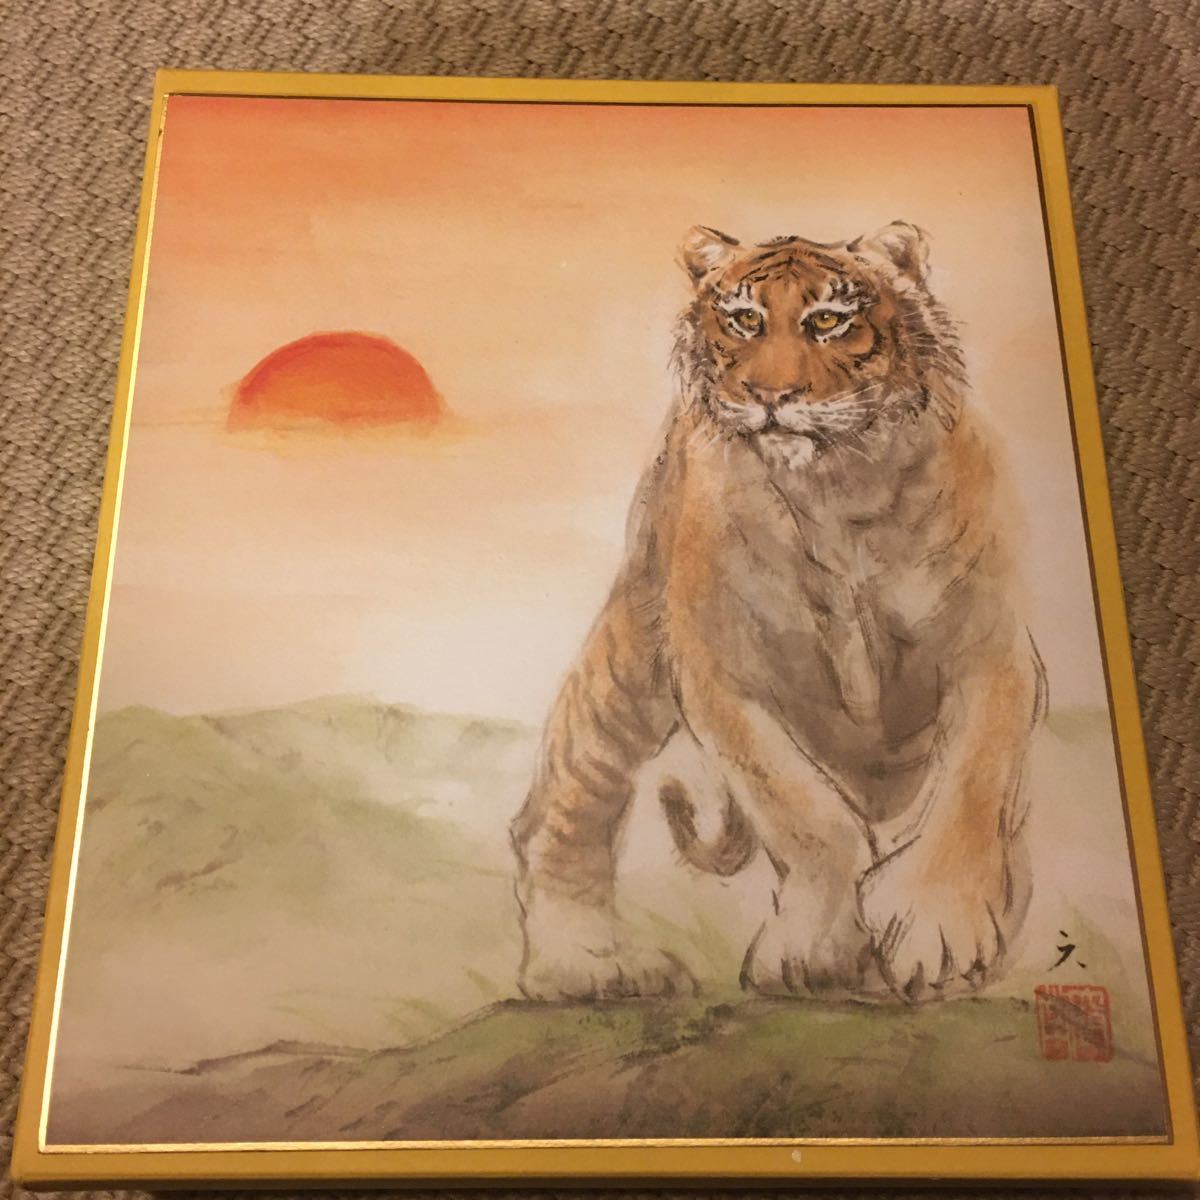 Buy it now Fujiwara Rokugendo Zodiac colored paper Tiger reproduction colored paper painting Japanese painting zodiac tiger Shipping fee \230, artwork, book, colored paper